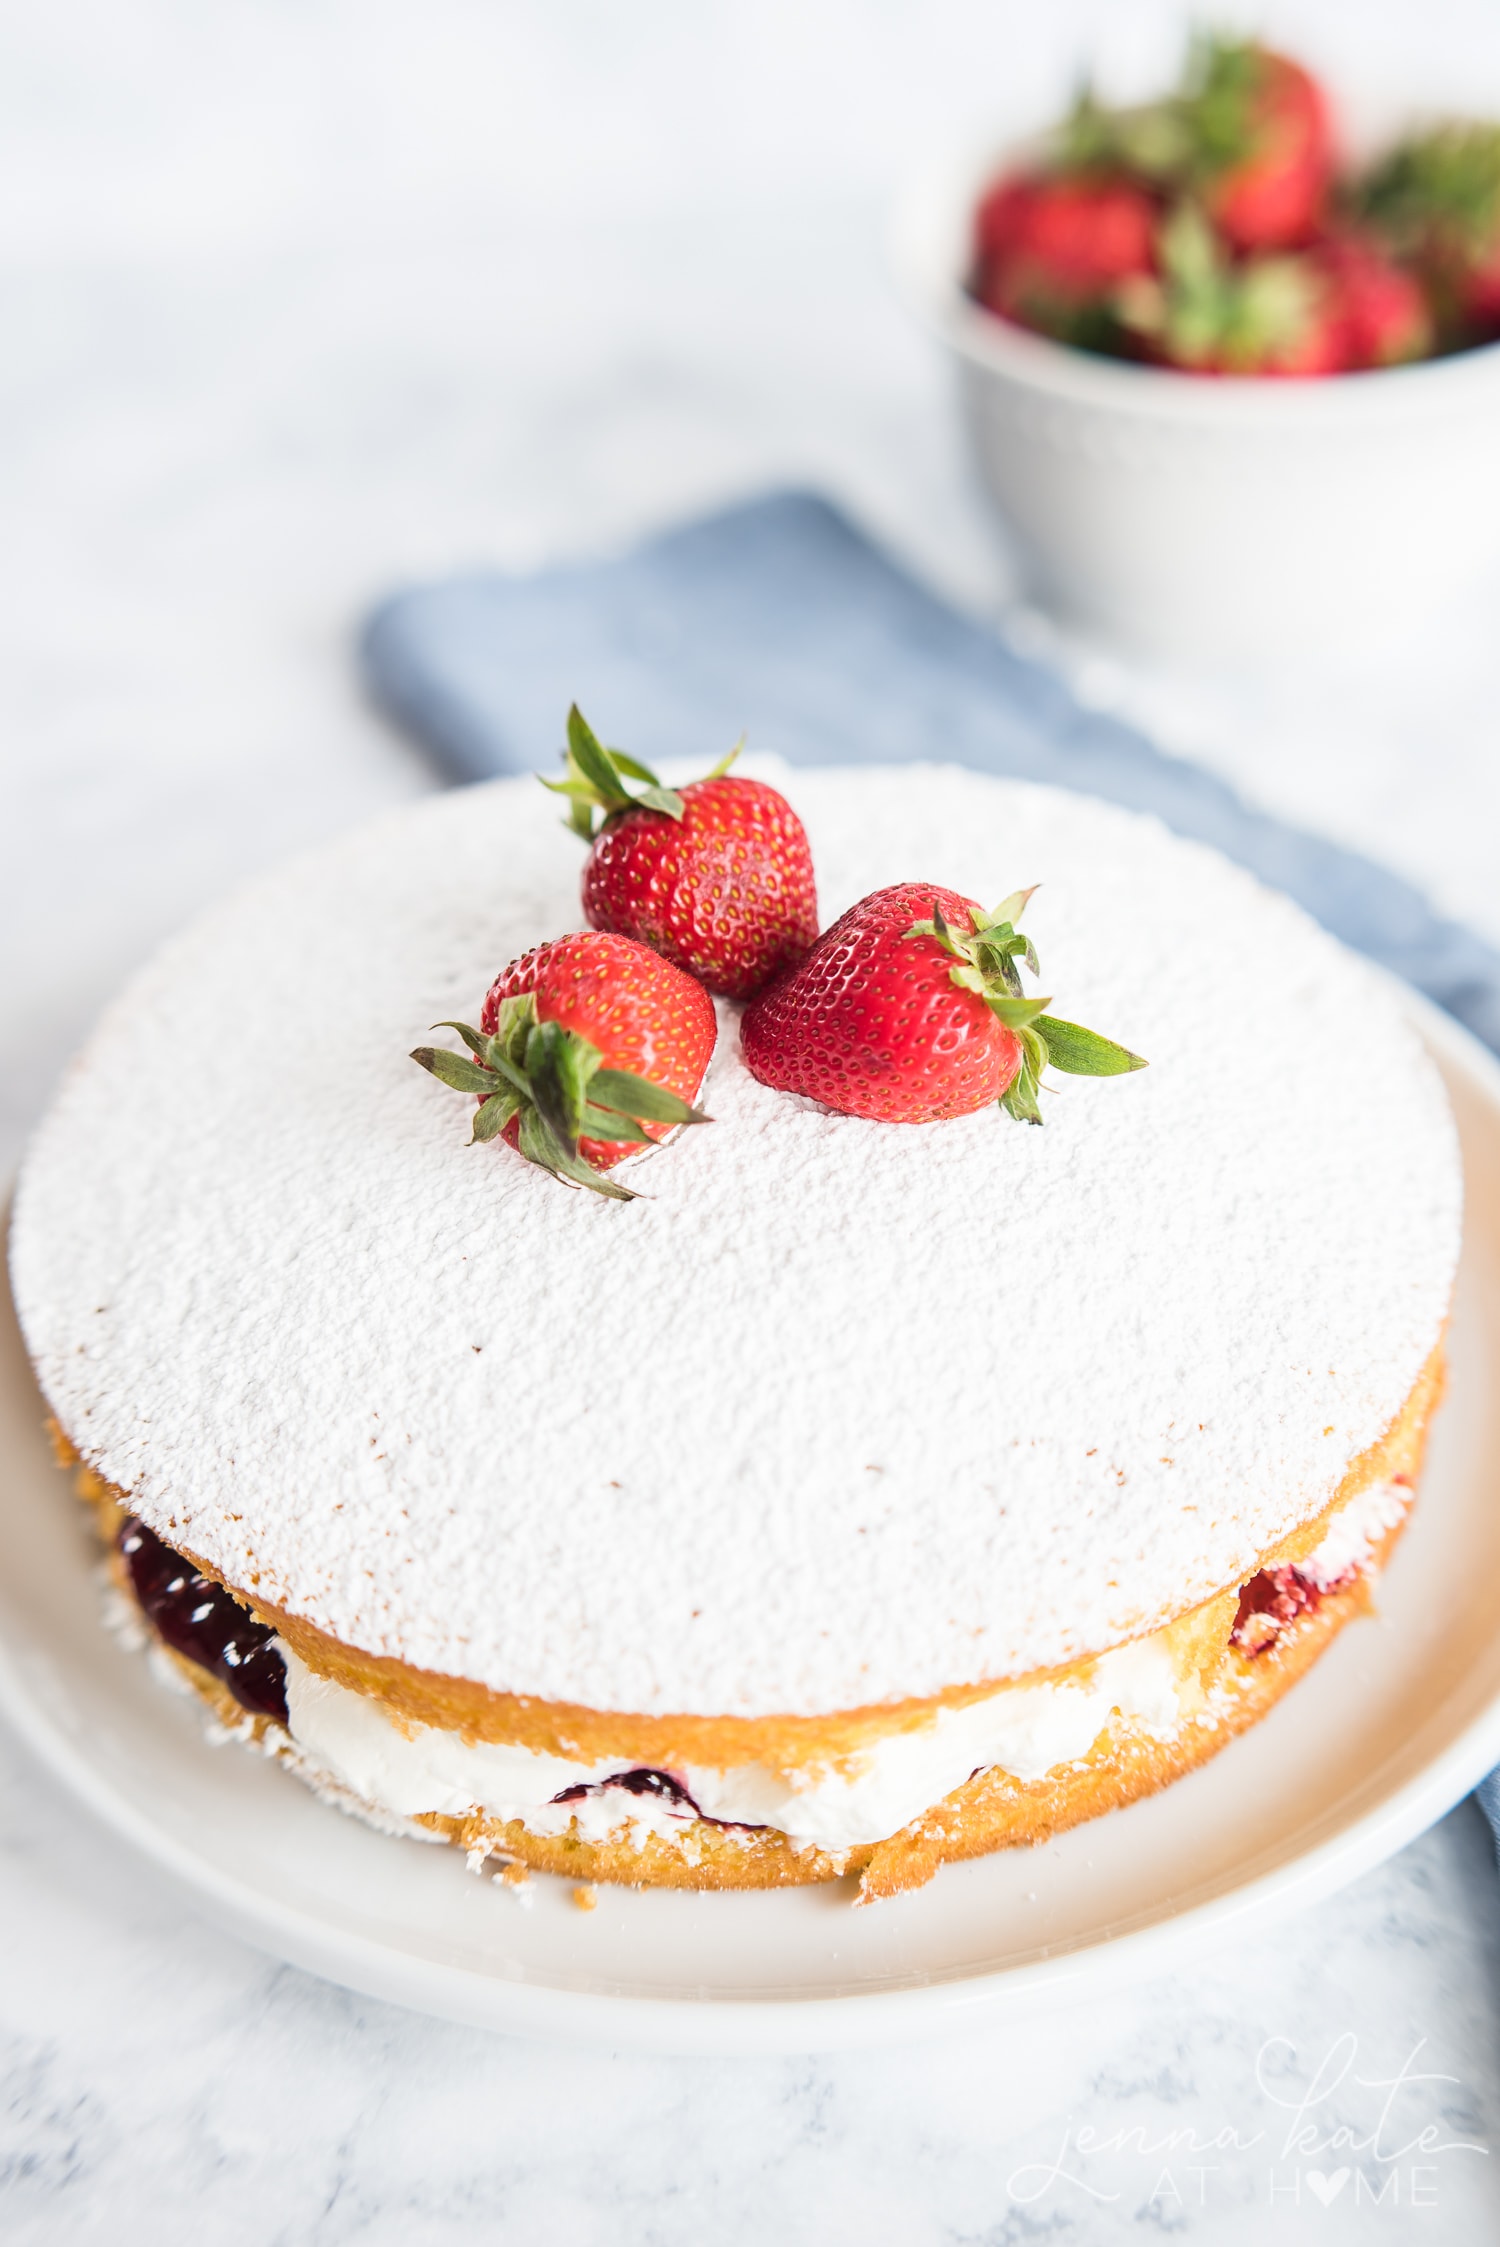 Top of victoria sponge cake, dusted with powdered sugar and topped with fresh whole strawberries